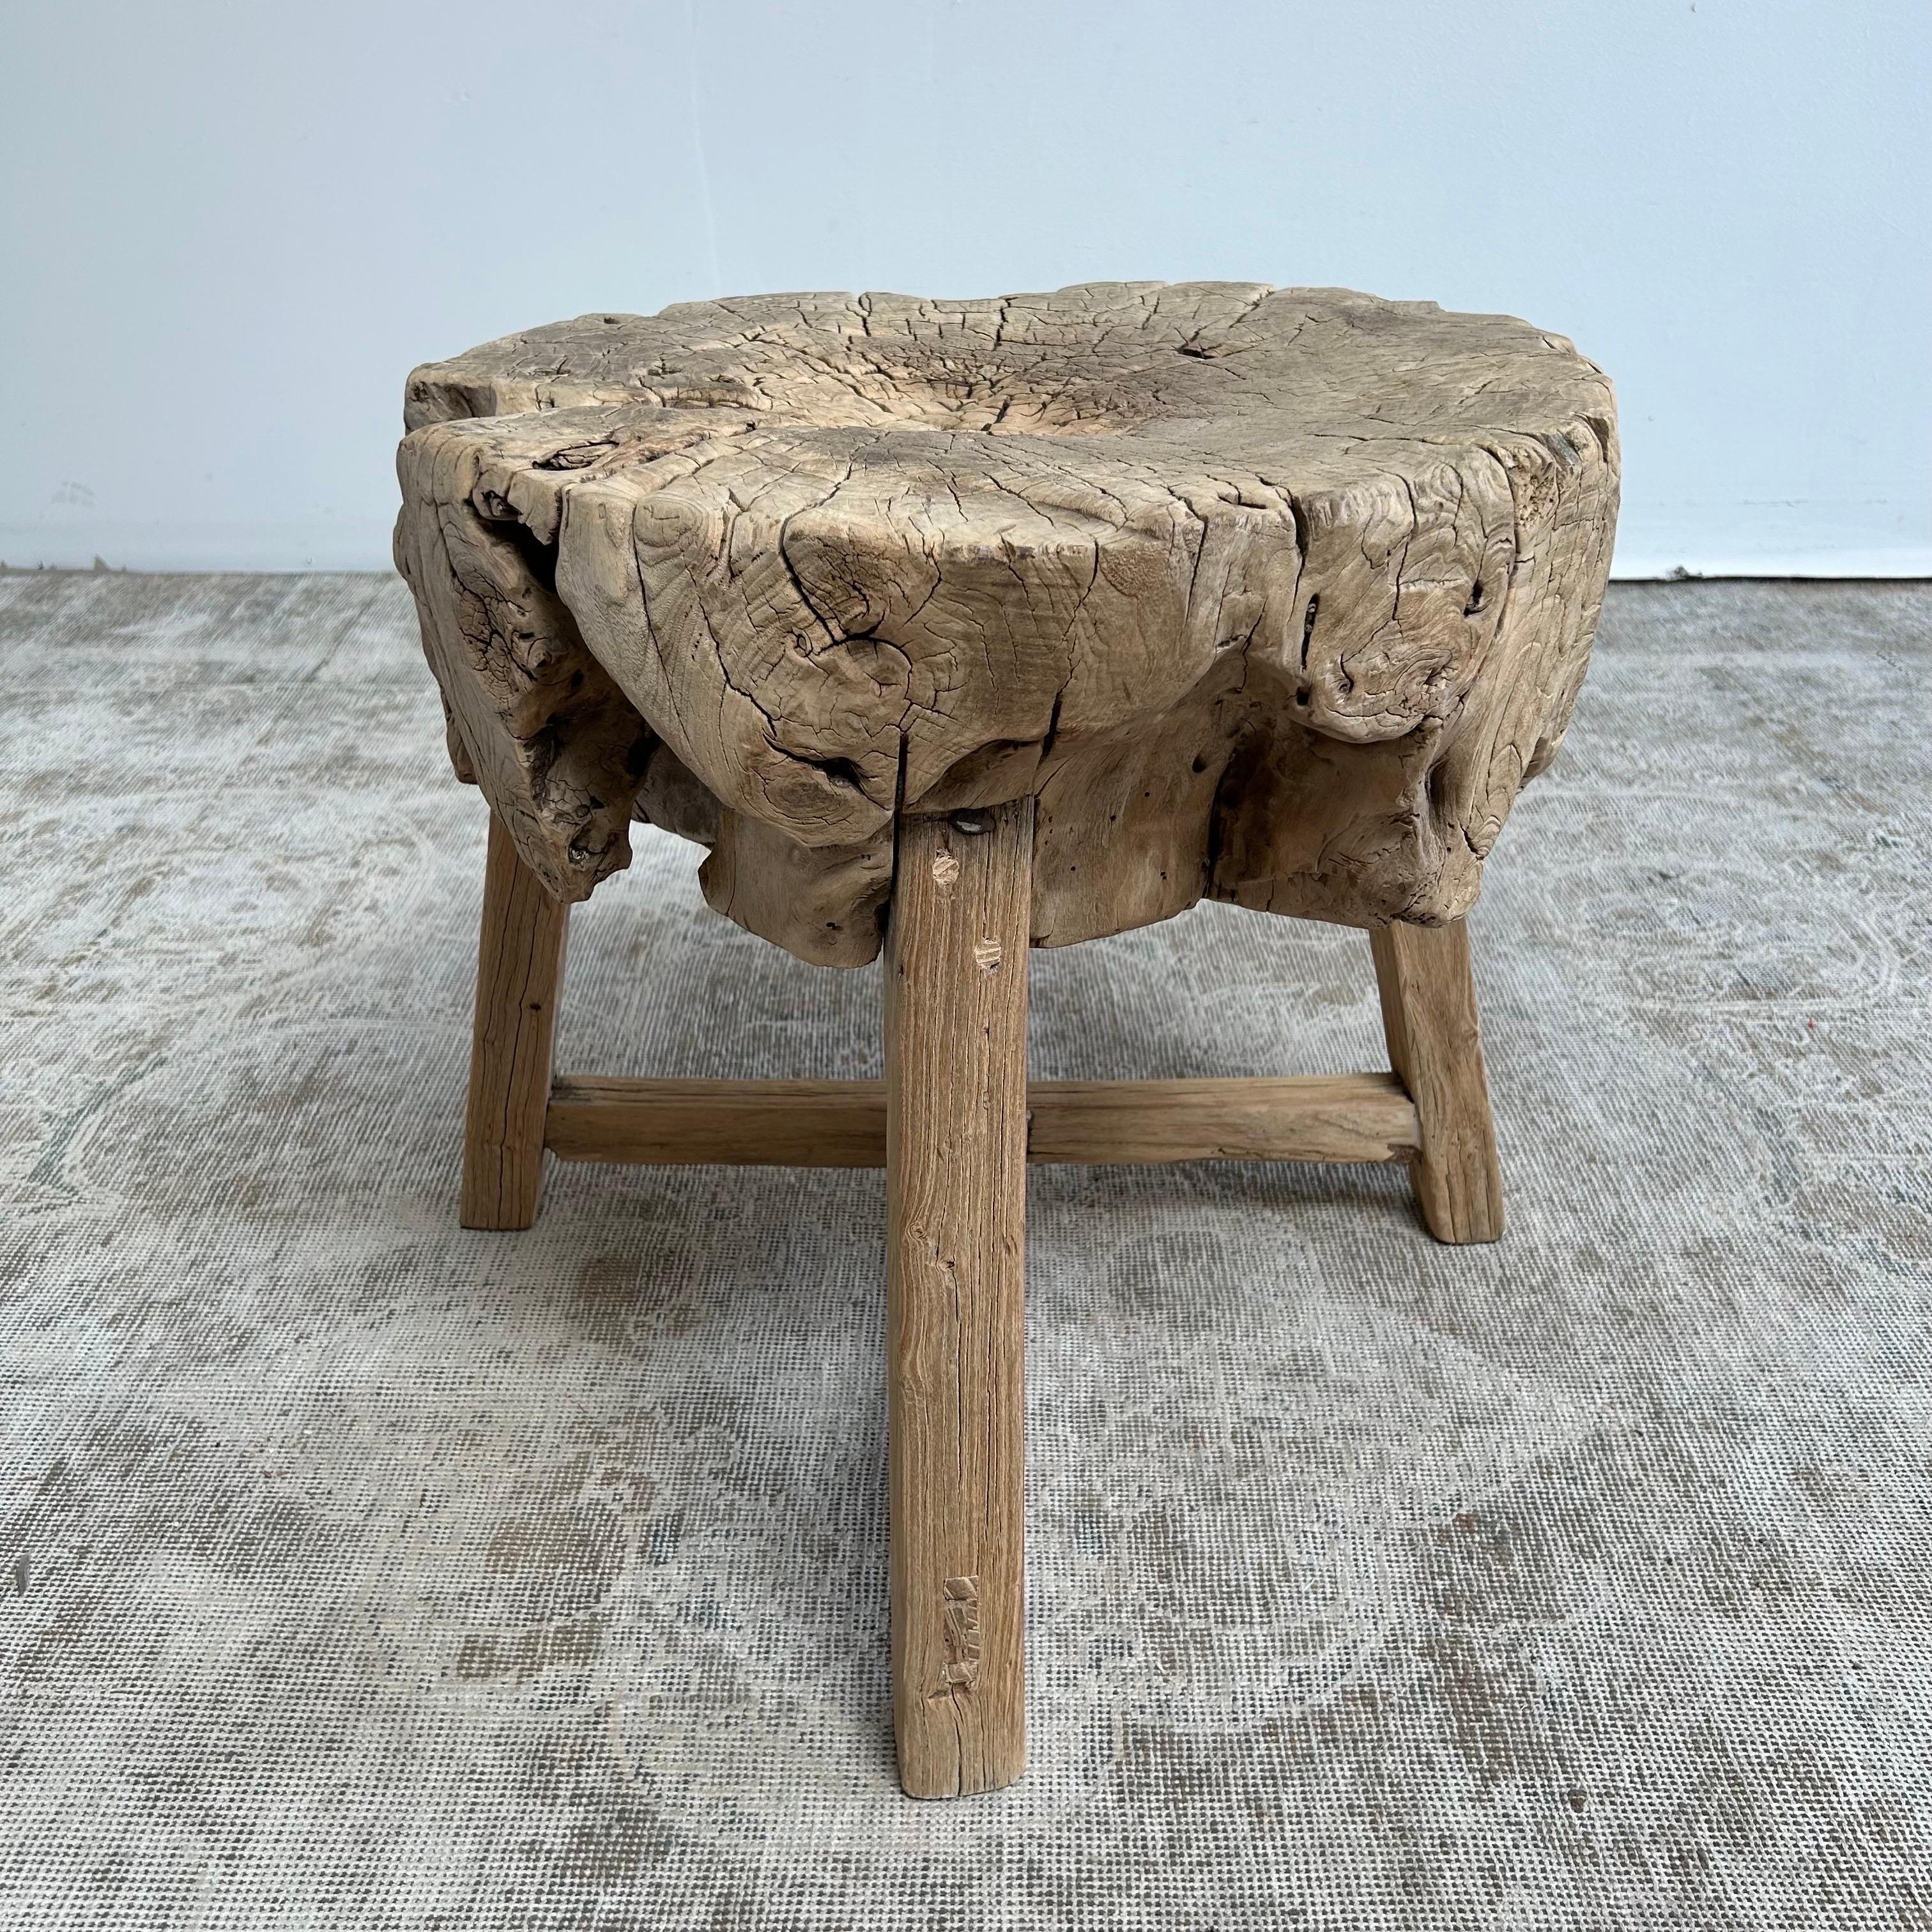 Elm wood stump slice or chop block table.
This solid stump slice was turned into a side table or stool. The solid thick top has a beautiful movement with unique characteristics. A natural live edge to show shape and form of what was. Solid and